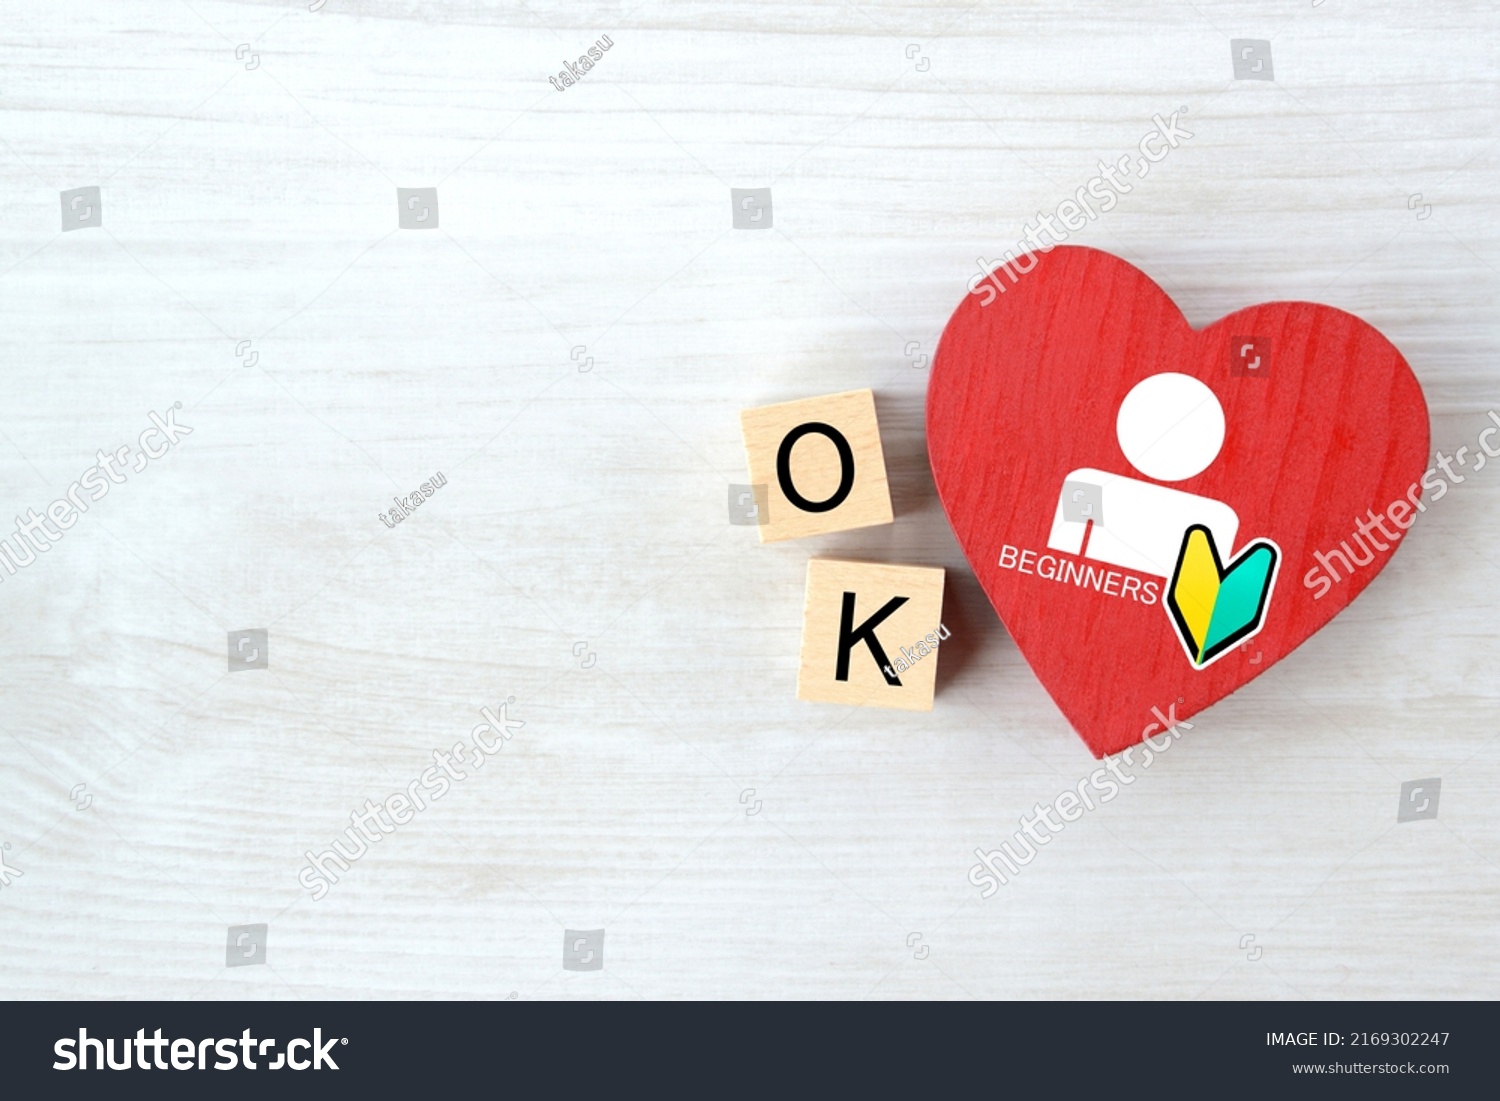 Heart object with human pictogram and Japanese beginners mark and wooden blocks with "OK" word #2169302247